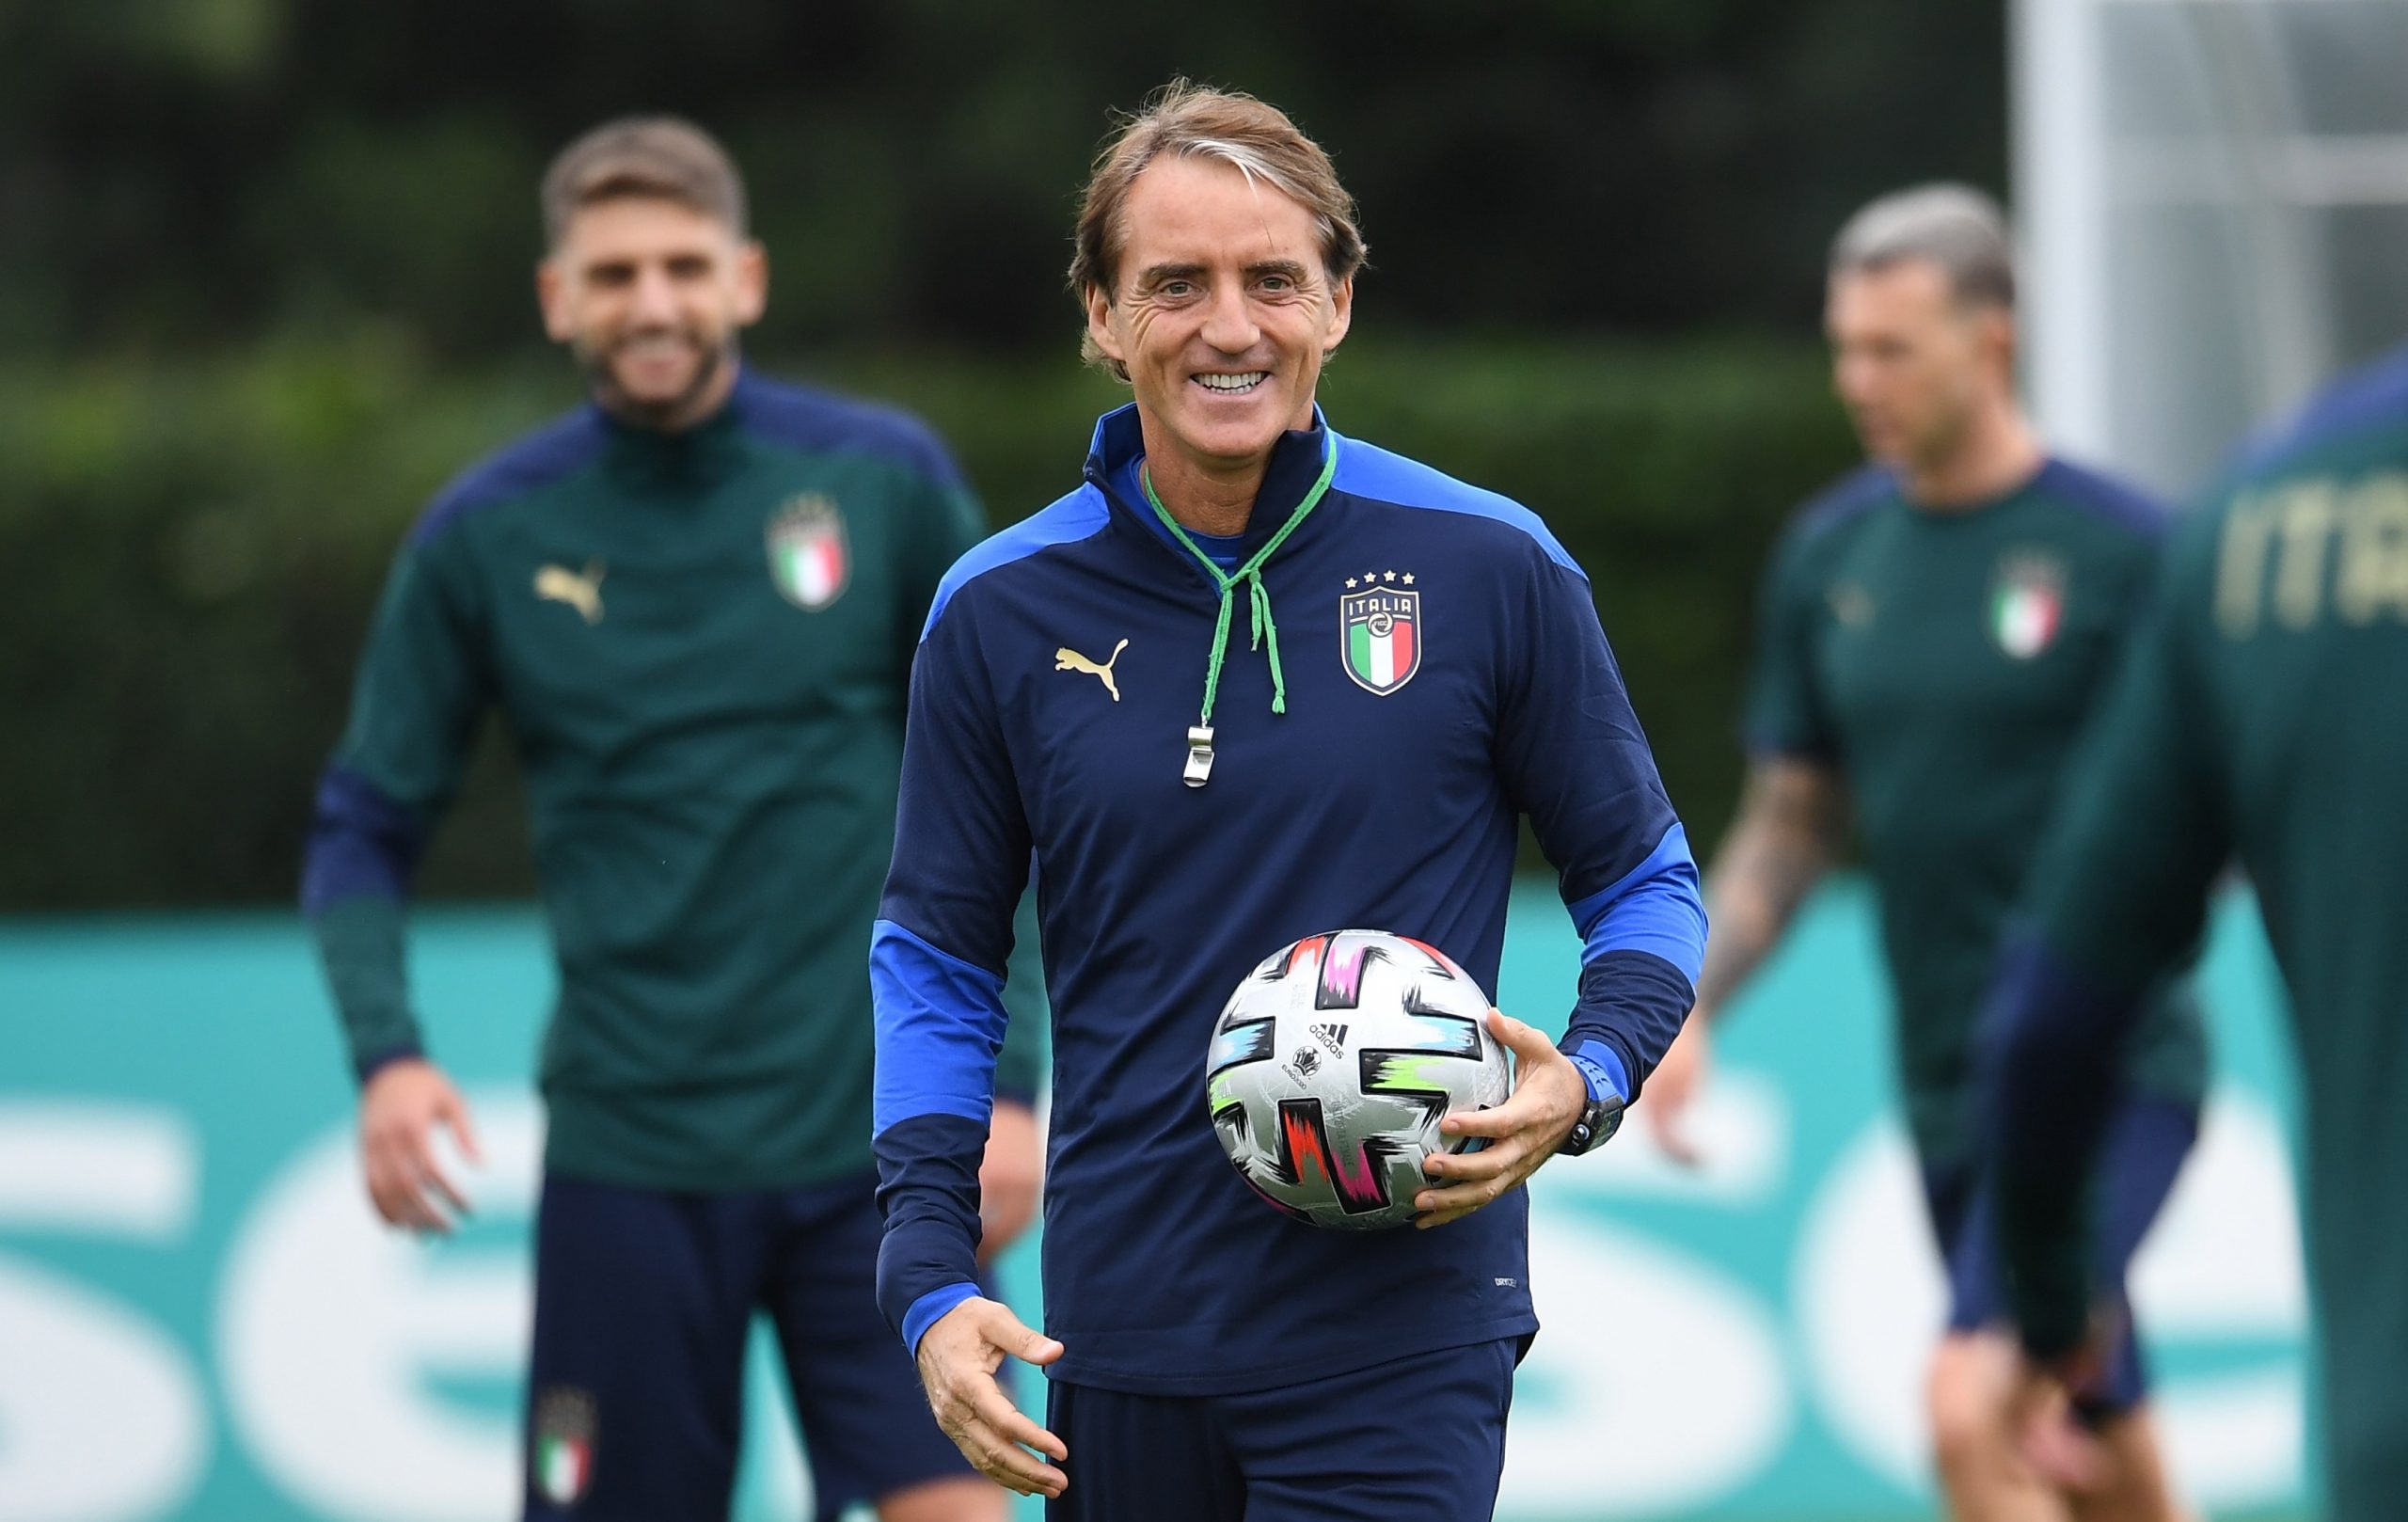 epa09336099 Italy's head coach Roberto Mancini during Italy's training session in London, Britain, 10 July 2021. Italy will face England in their UEFA EURO 2020 final soccer match at Wembley stadium in London on 11 July 2021.  EPA/ANDY RAIN